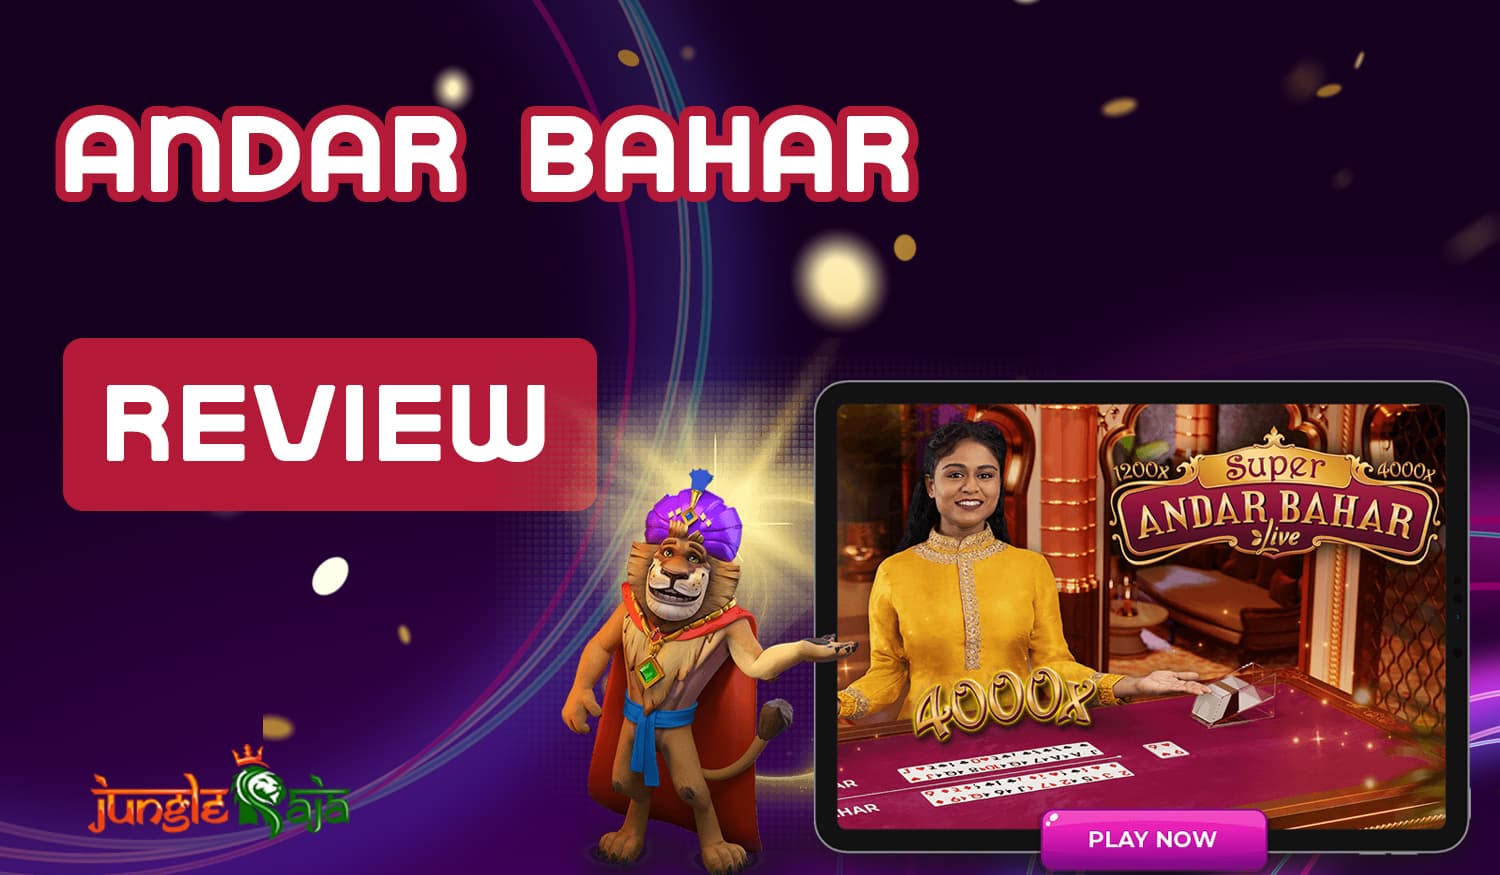 Andar Bahar game: overview, rules and demo mode at JungleRaja casino